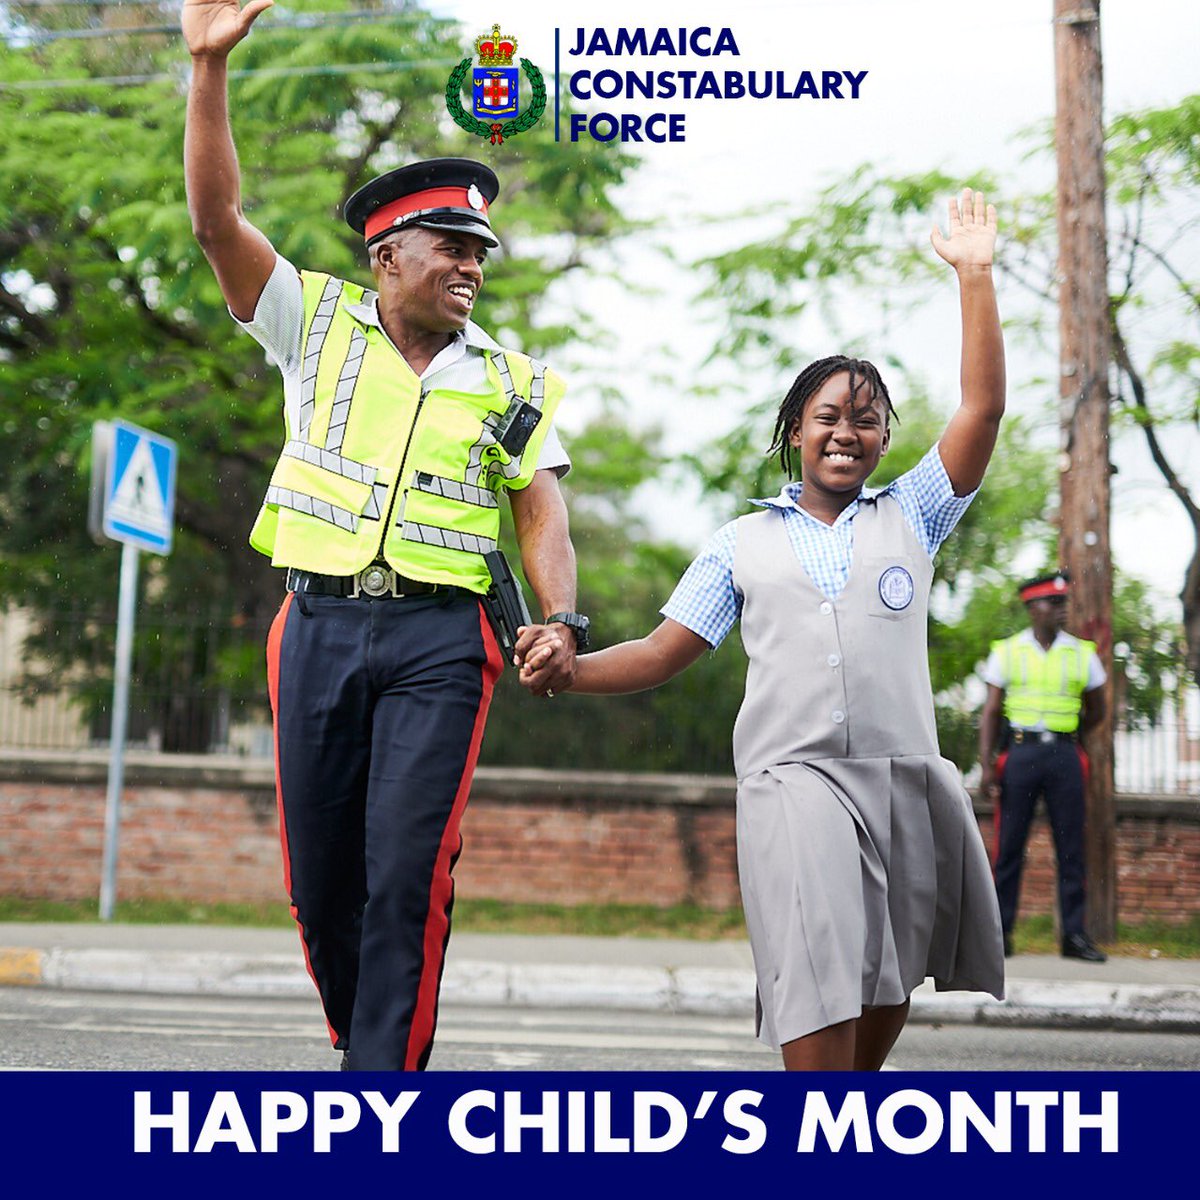 Let’s keep on working together to keep our future safe. Unplug negativity, connect positivity, think! #ChildsMonth #HelpUsKeepYouSafe